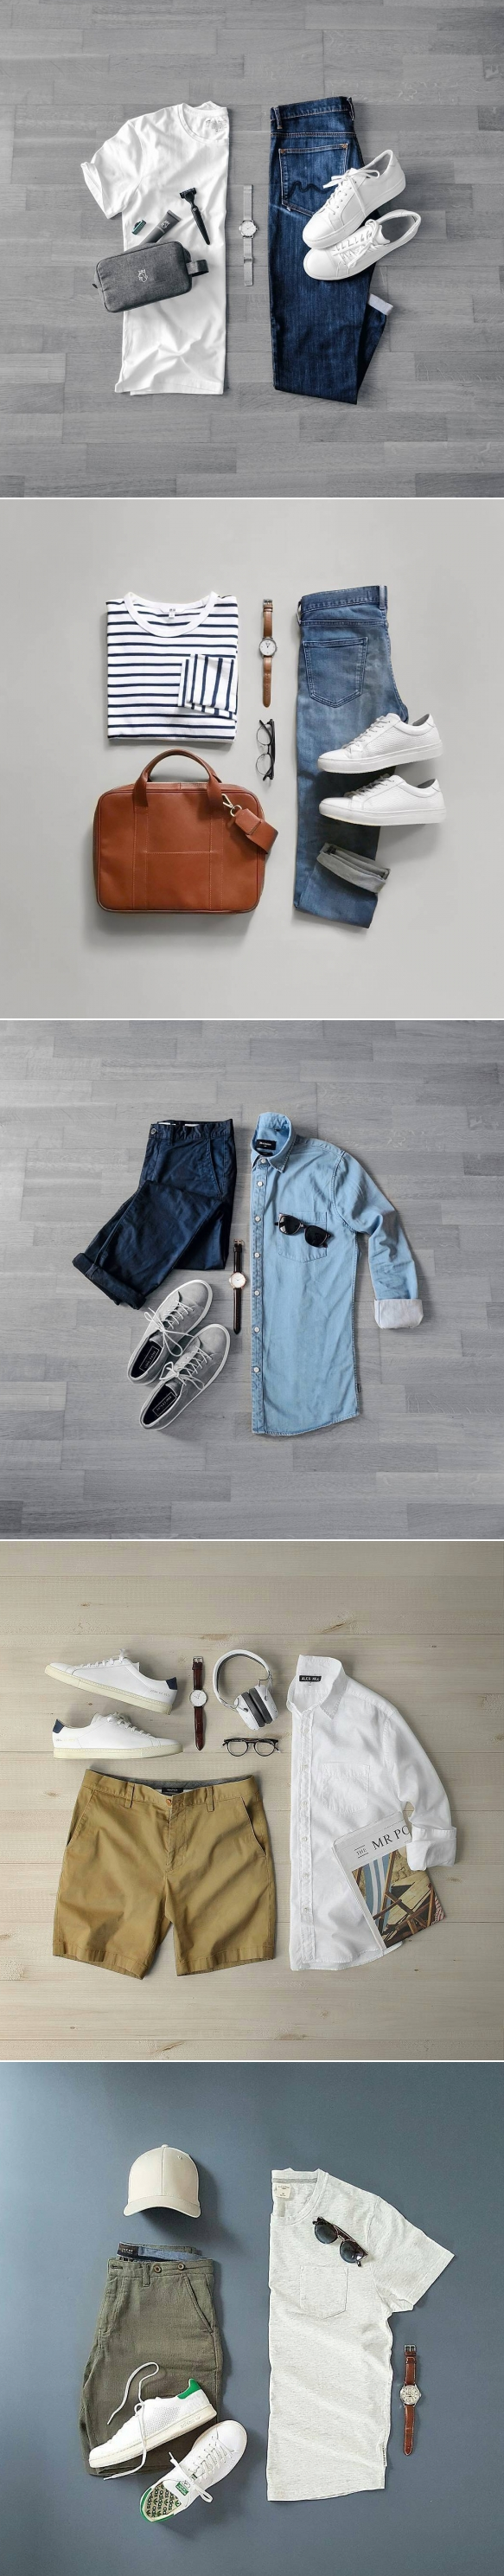 outfit grids for men 